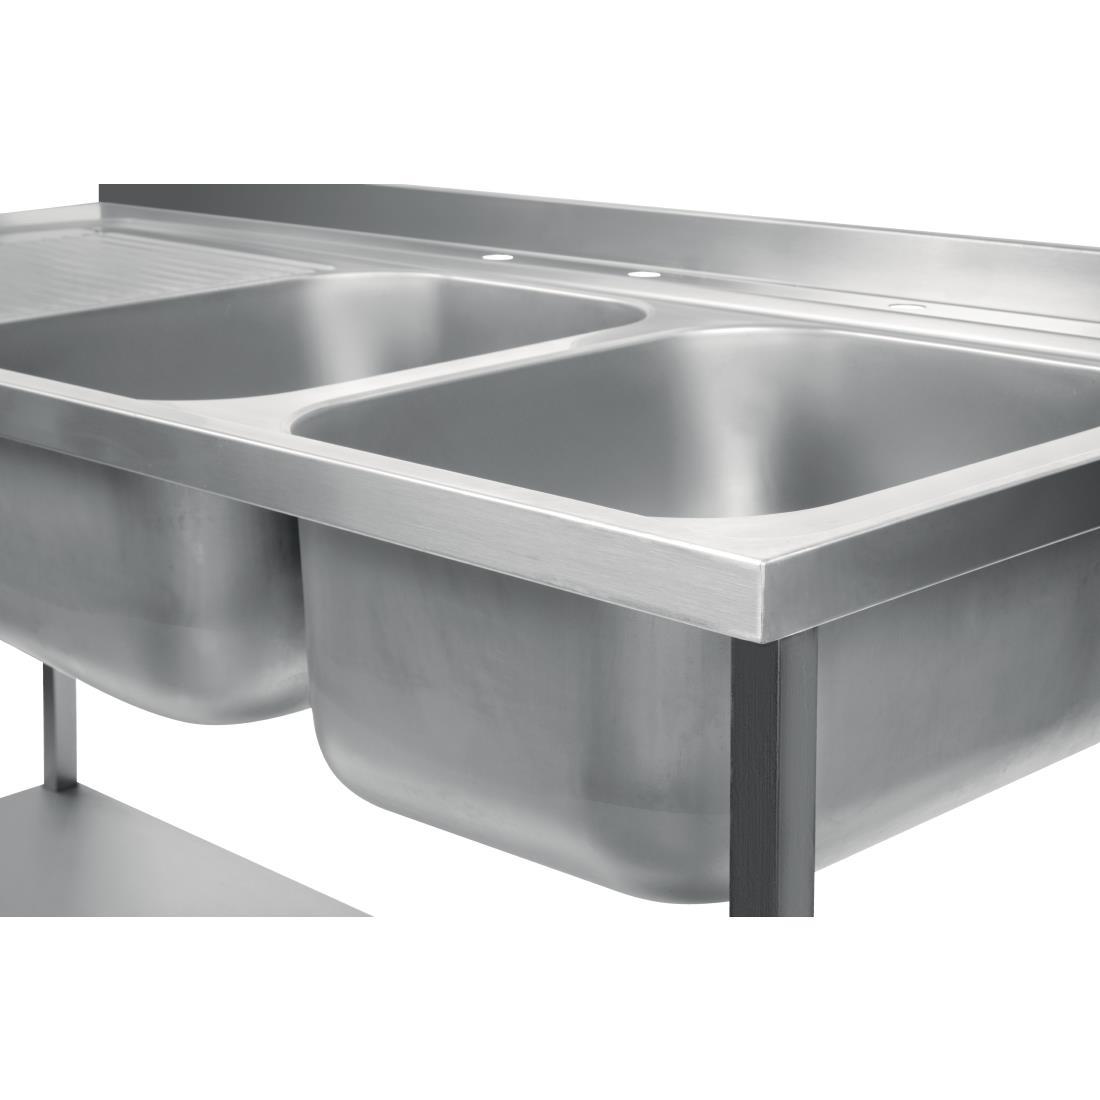 Holmes Fully Assembled Stainless Steel Sink Left Hand Drainer 1800mm - DR395  - 4